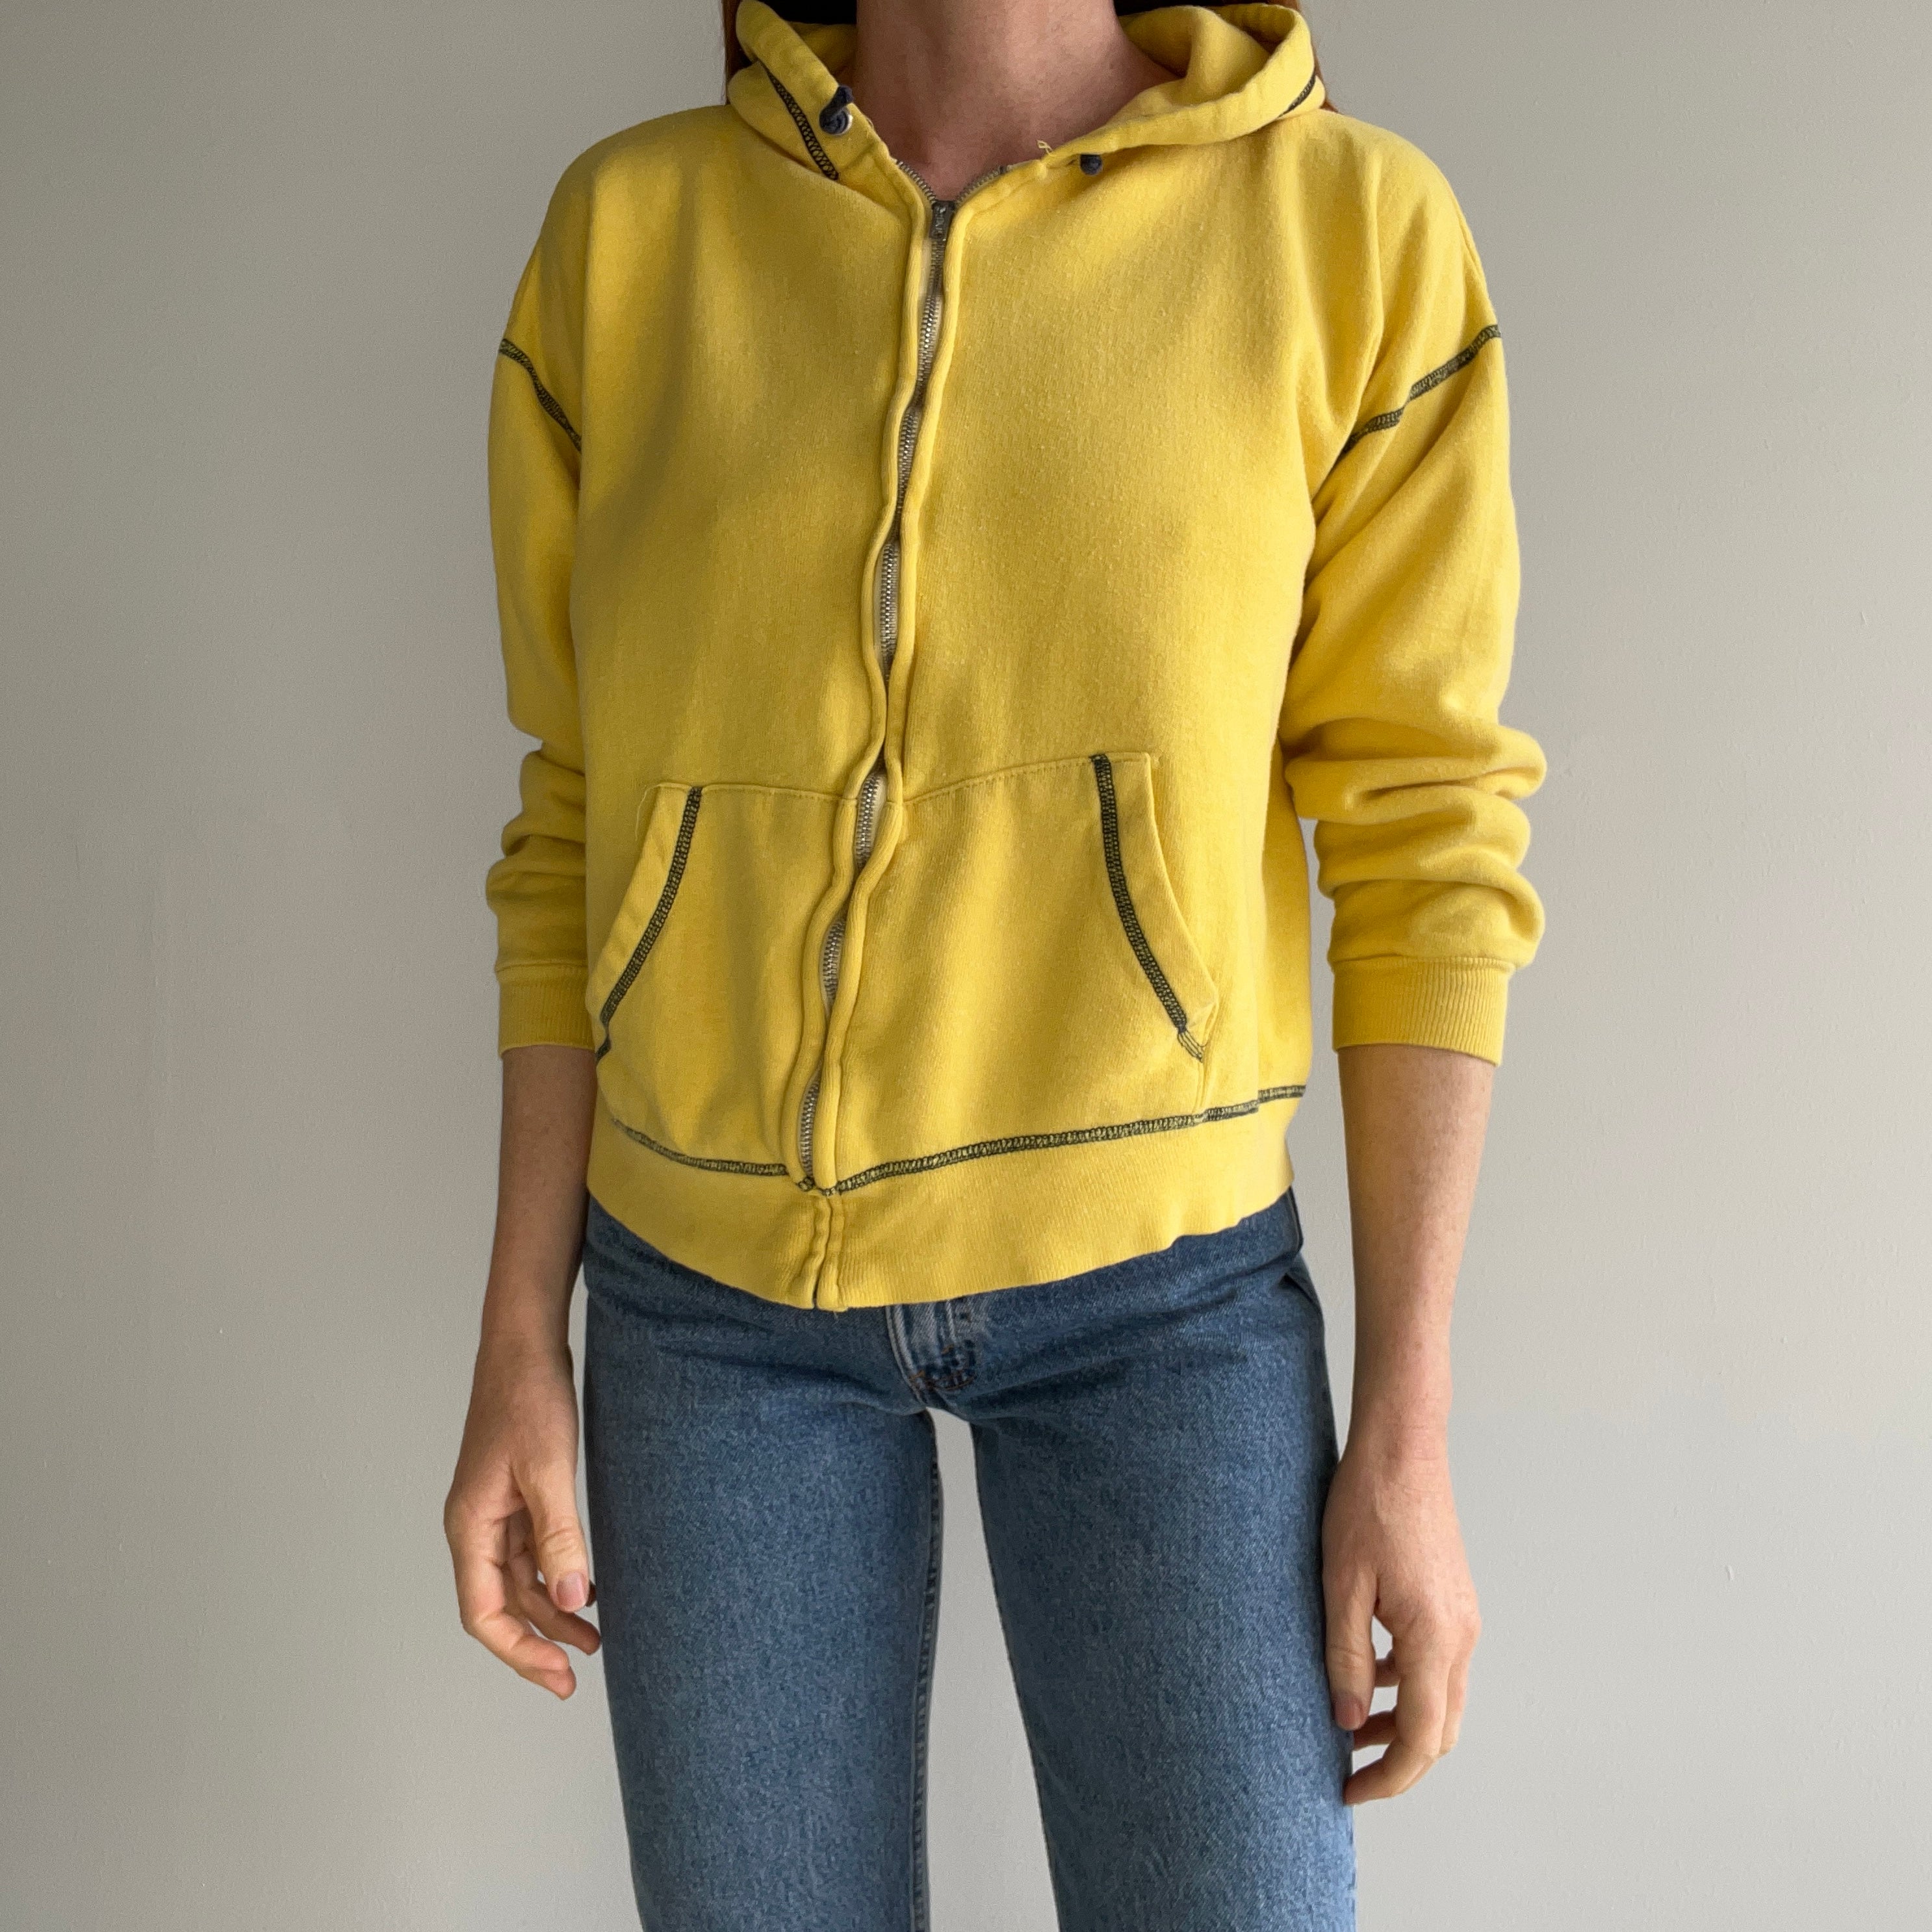 1970s Mostly Cotton Zip Up Hoodie with Navy Contrast Stitching